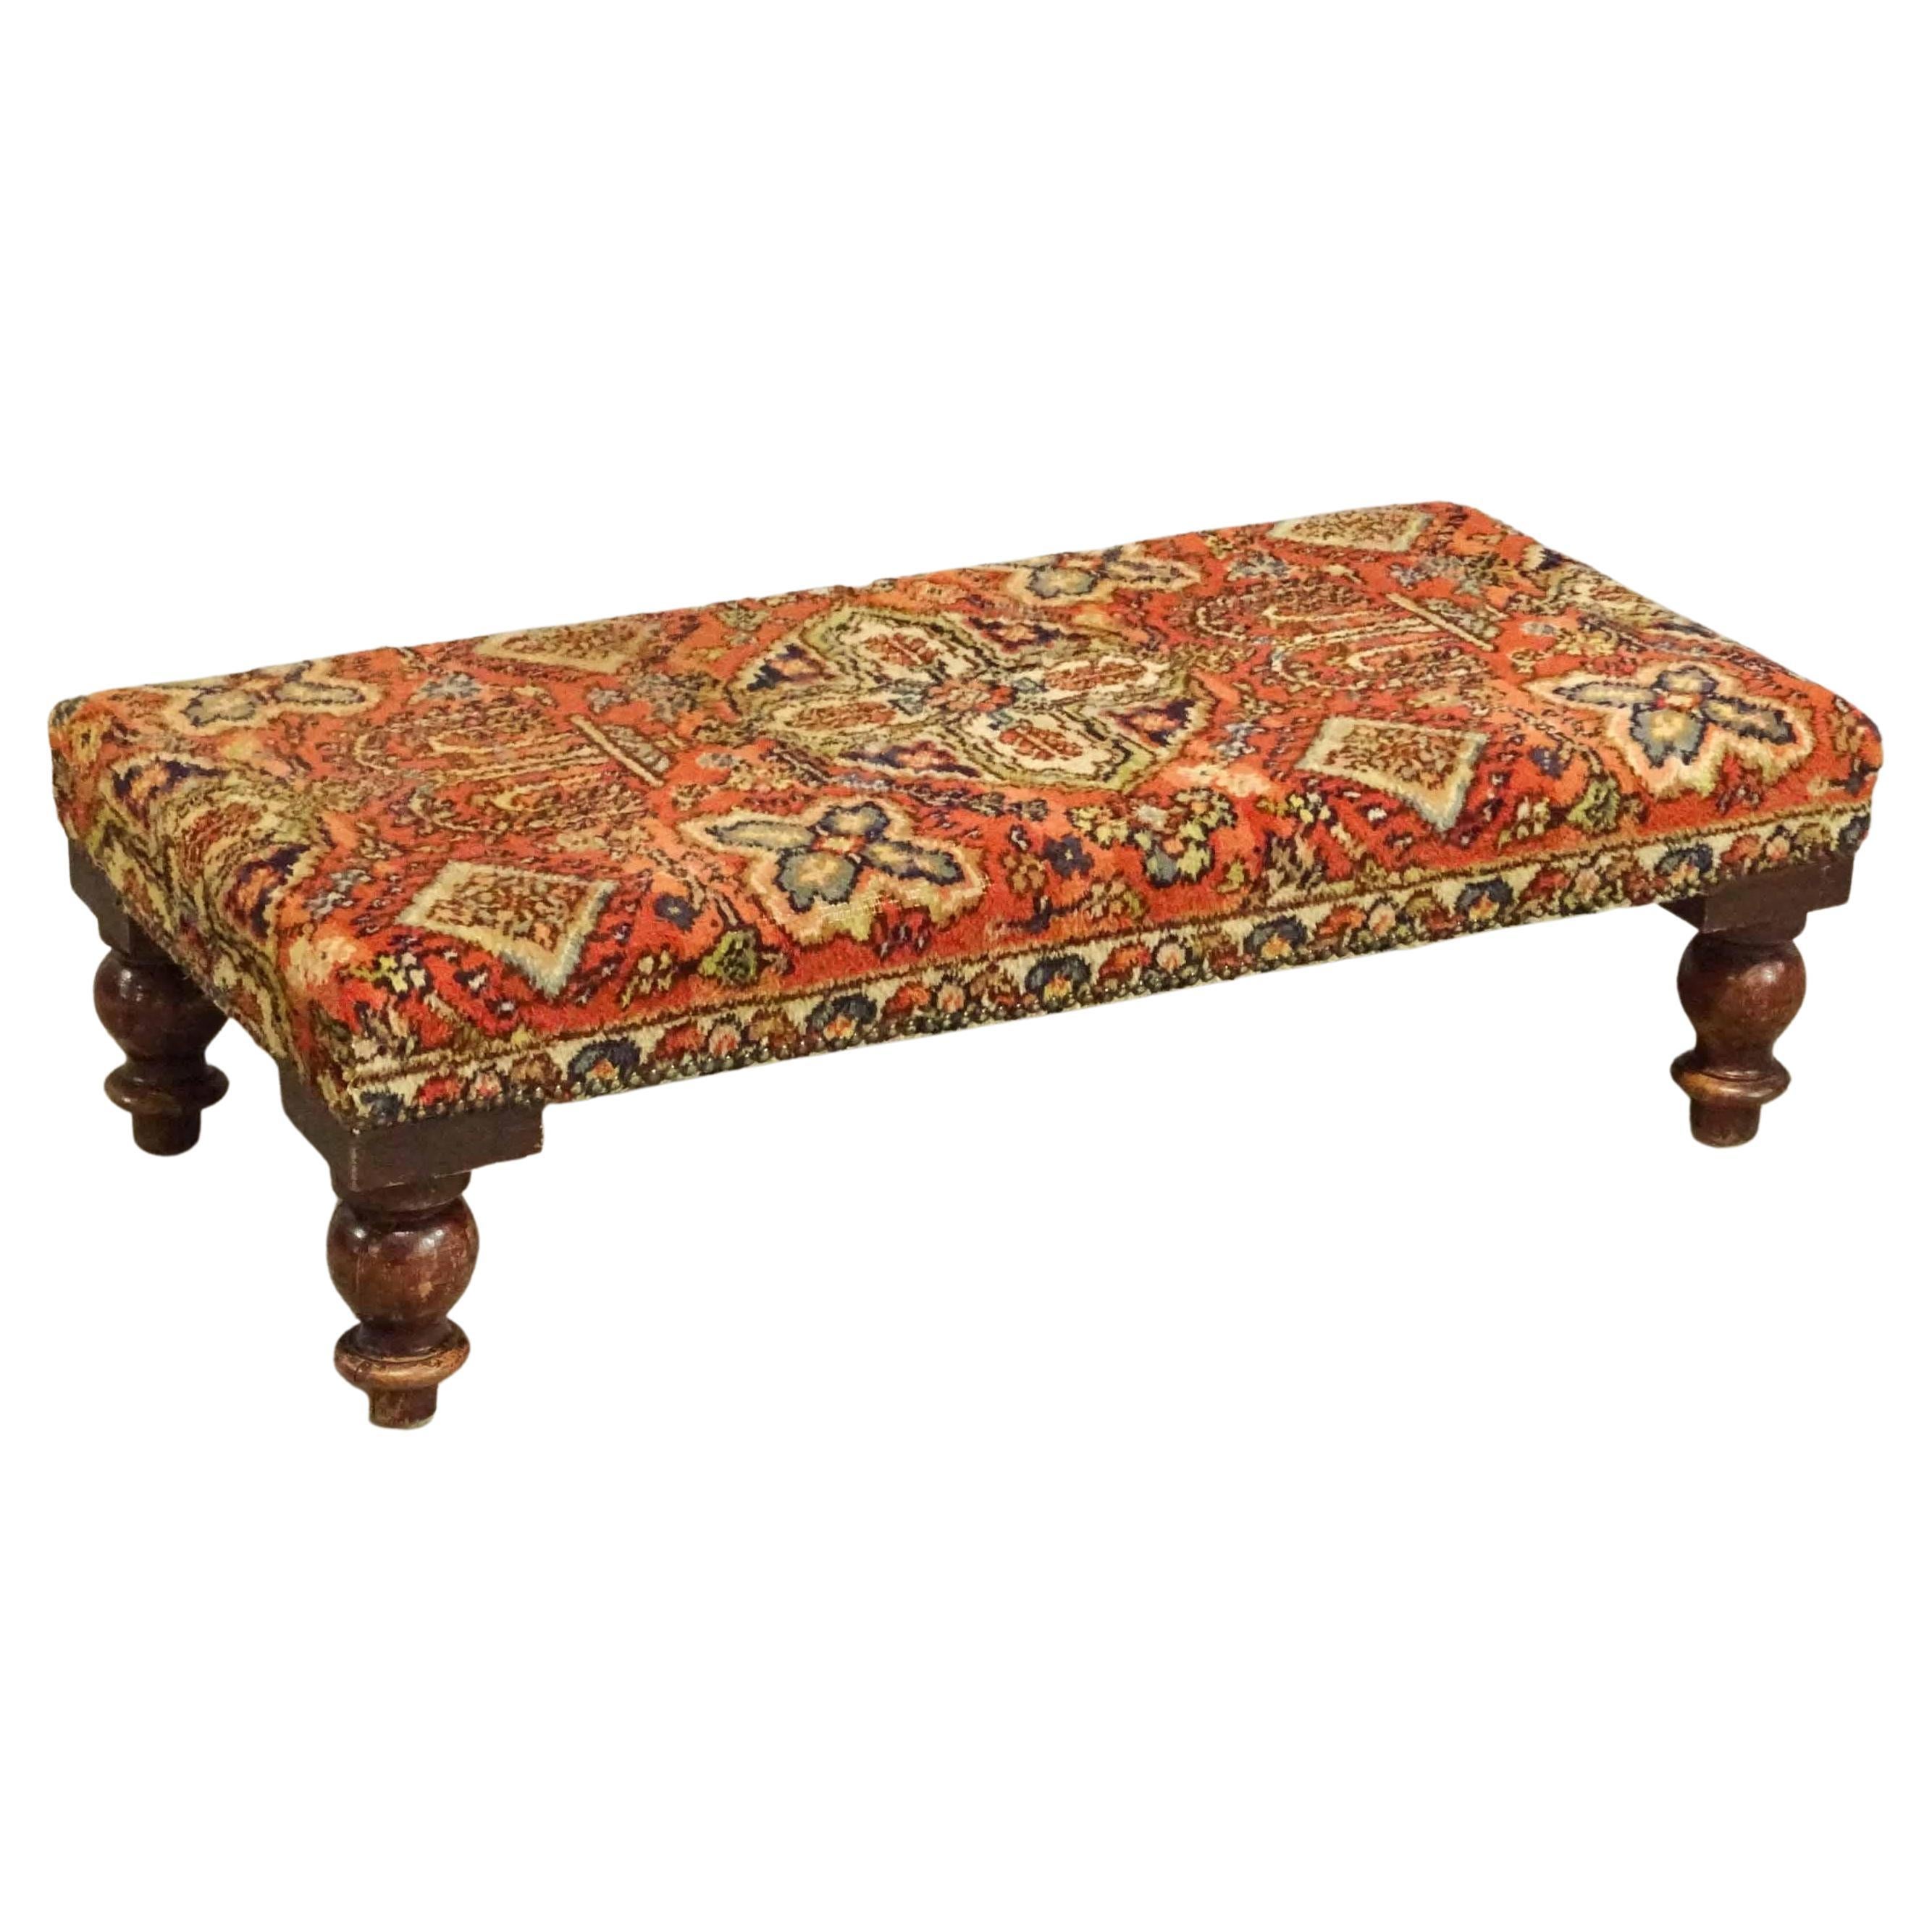 Late 19th to Early 20th Century Oriental Rug Upholstered Bench